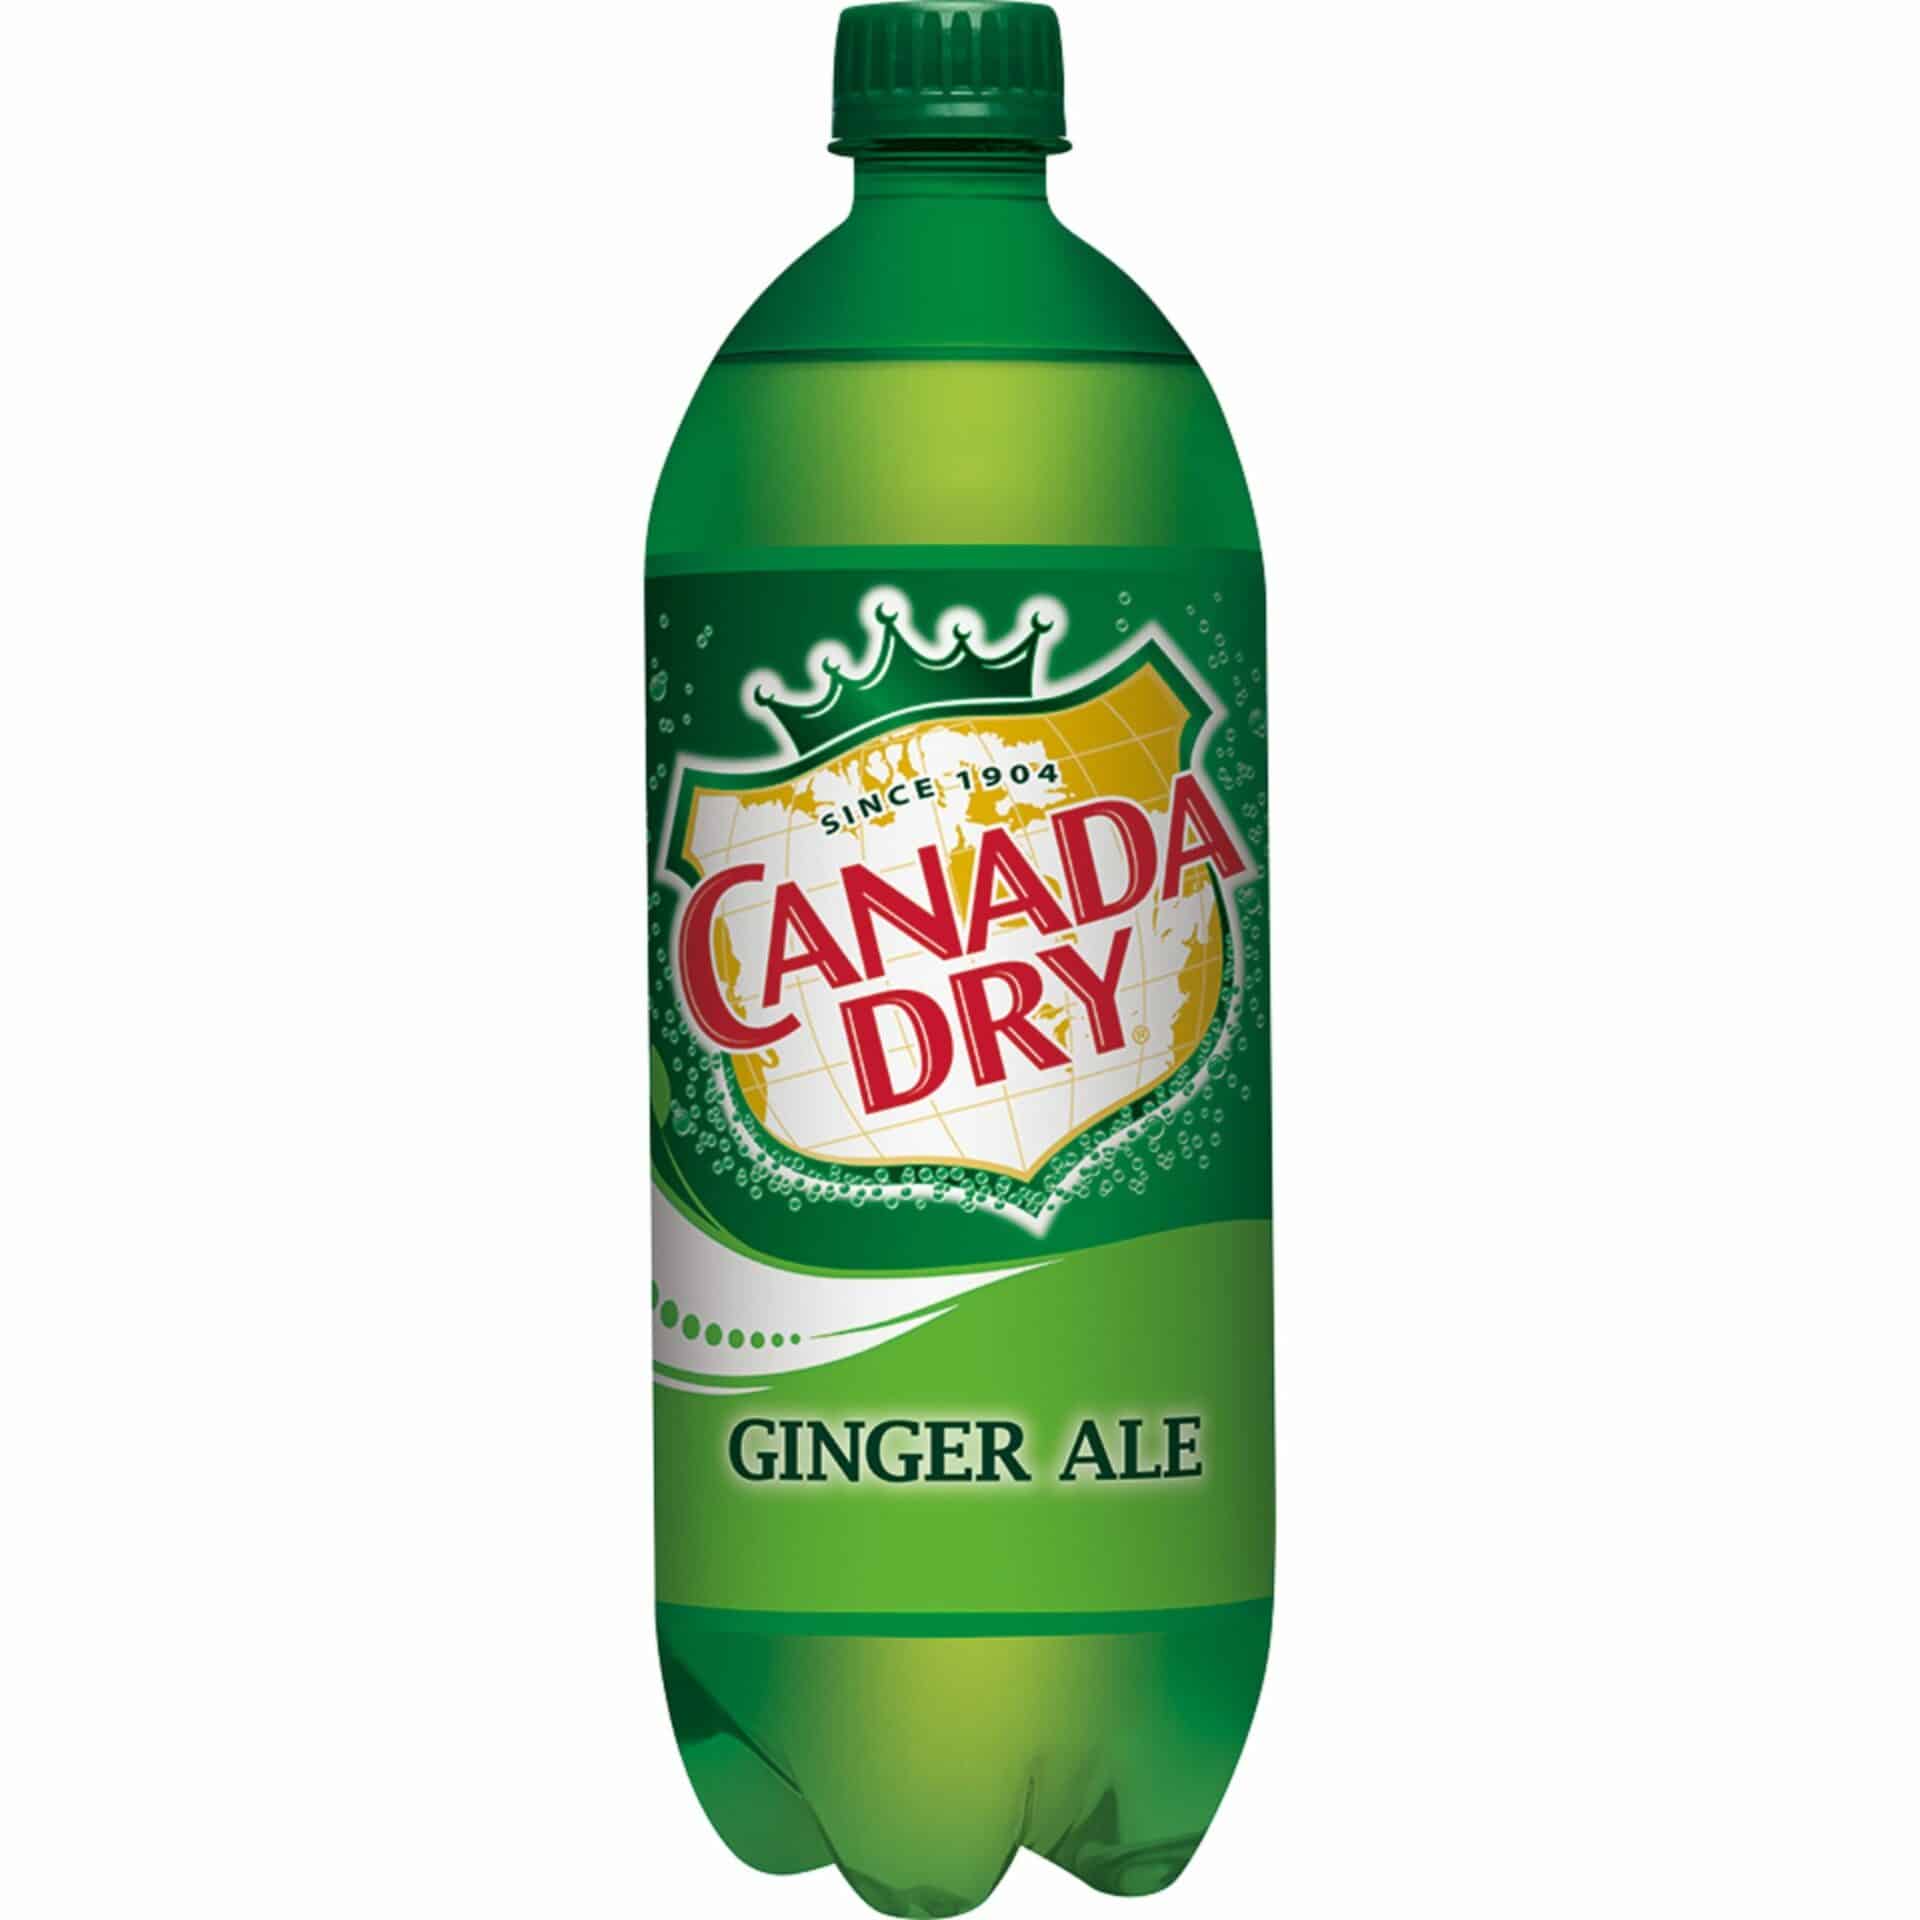 Can You Drink Ginger Ale While Pregnant?